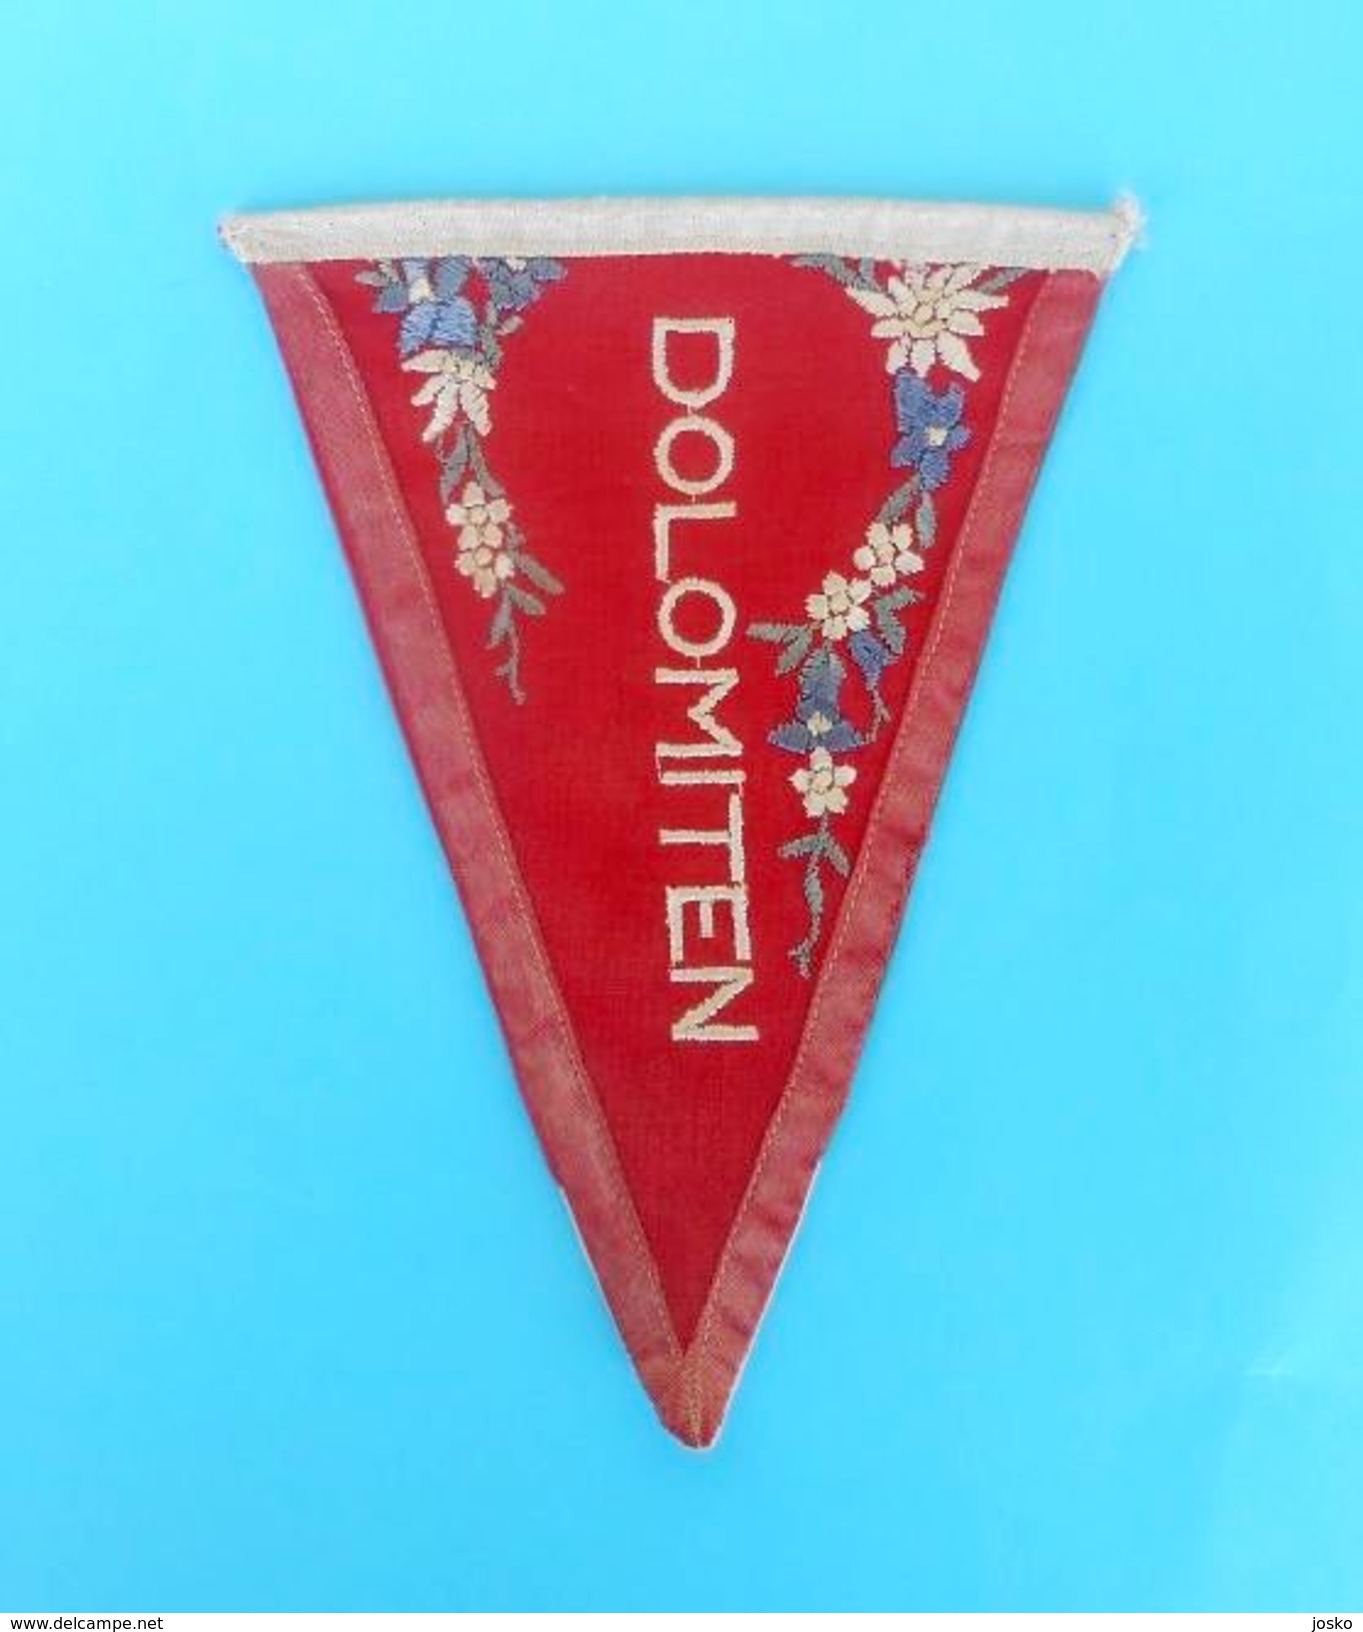 WINTER OLYMPIC GAMES CORTINA 1956. Dolomiten Italy - Vintage Olympics Pennant Flag Fanion Jeux Olympiques Olympia Italia - Apparel, Souvenirs & Other